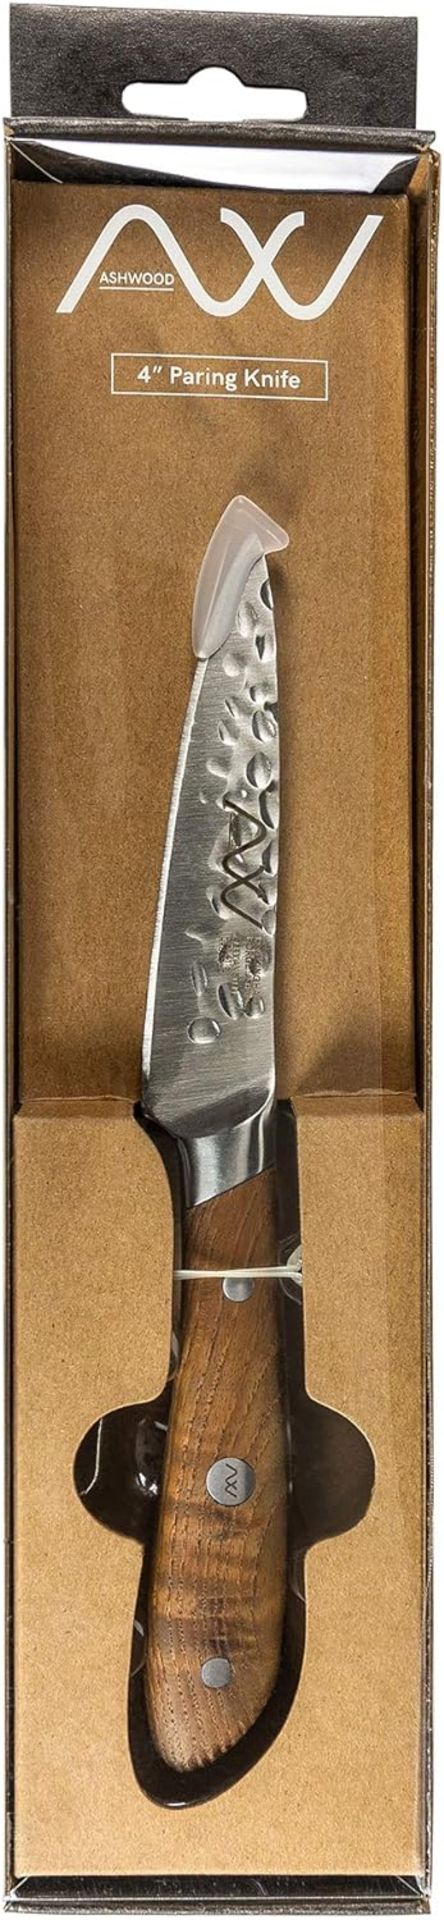 1 Pallet (1400 Pieces) of Rockingham Forge Ashwood Series 4” Paring Knife RRP £23100 - Image 2 of 4